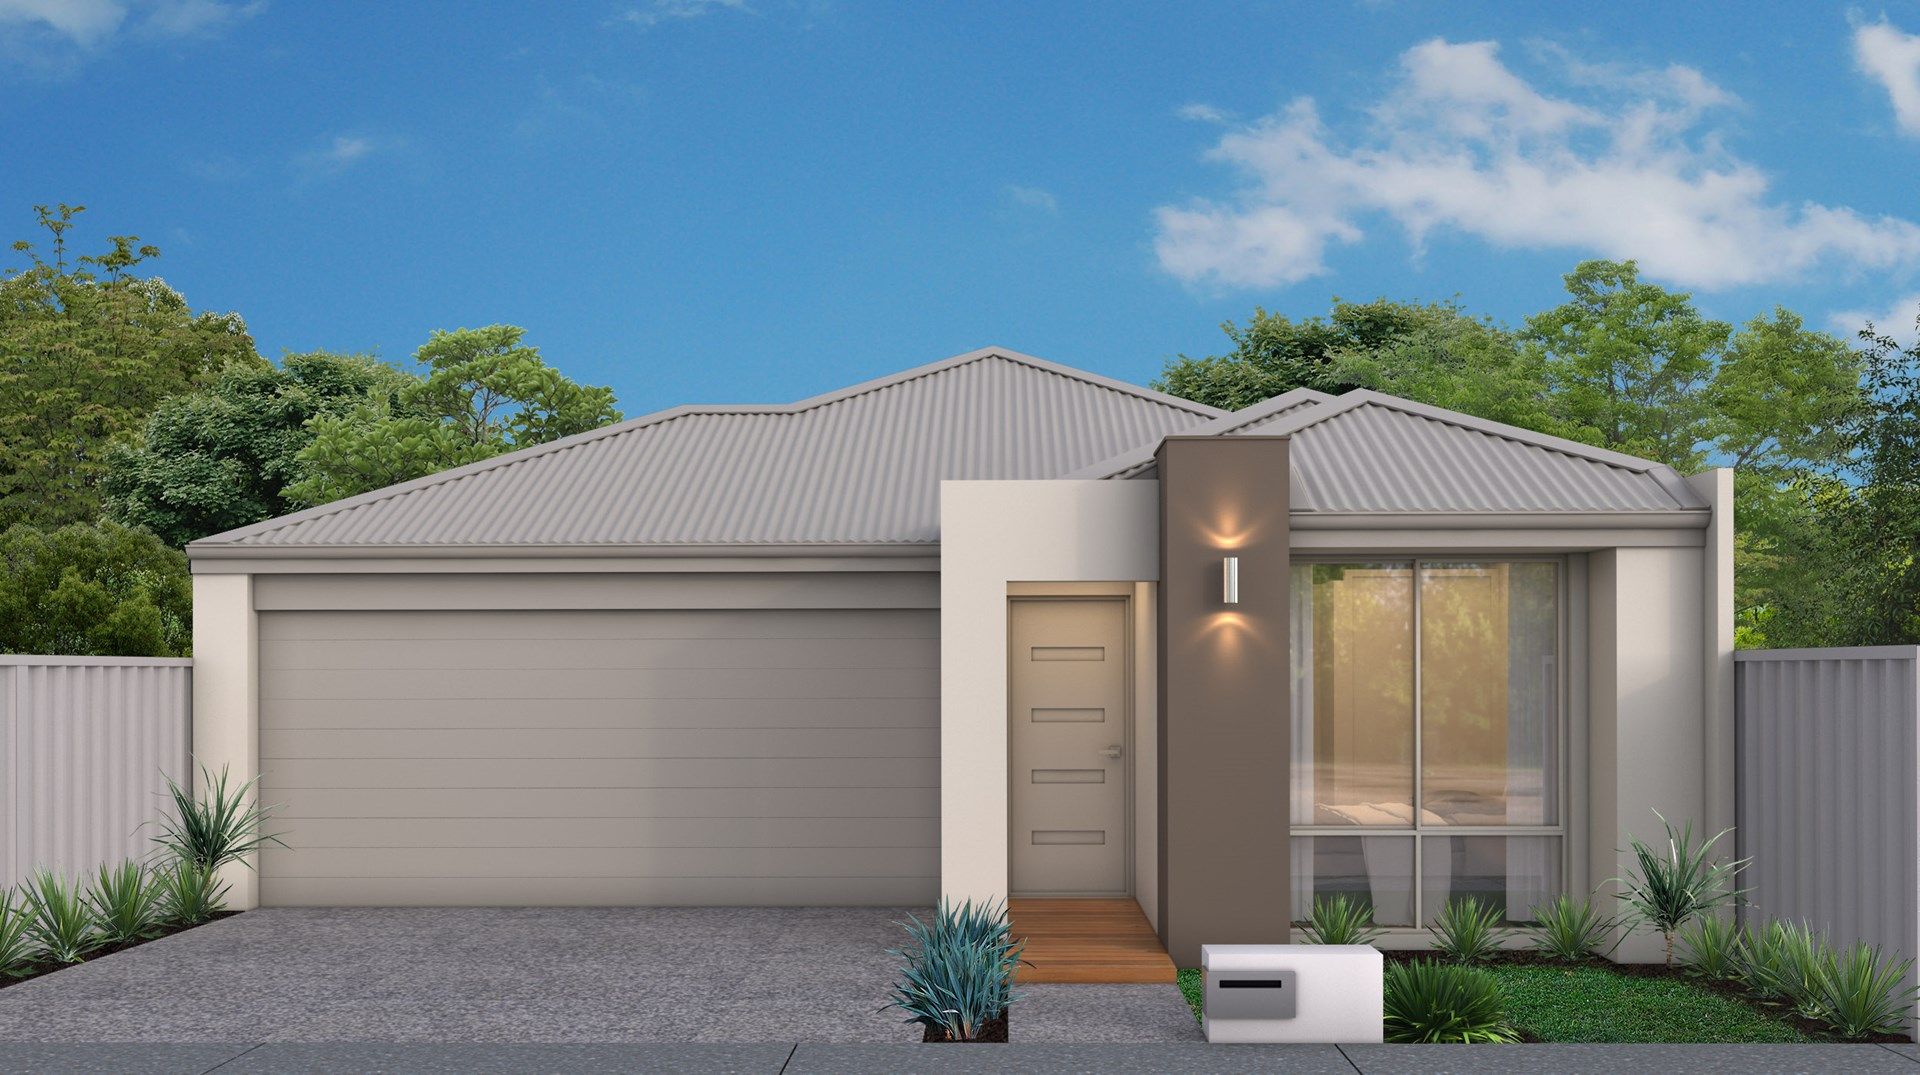 3 bedrooms New House & Land in lot 178 FLANNIGAN STREET ANKETELL WA, 6167